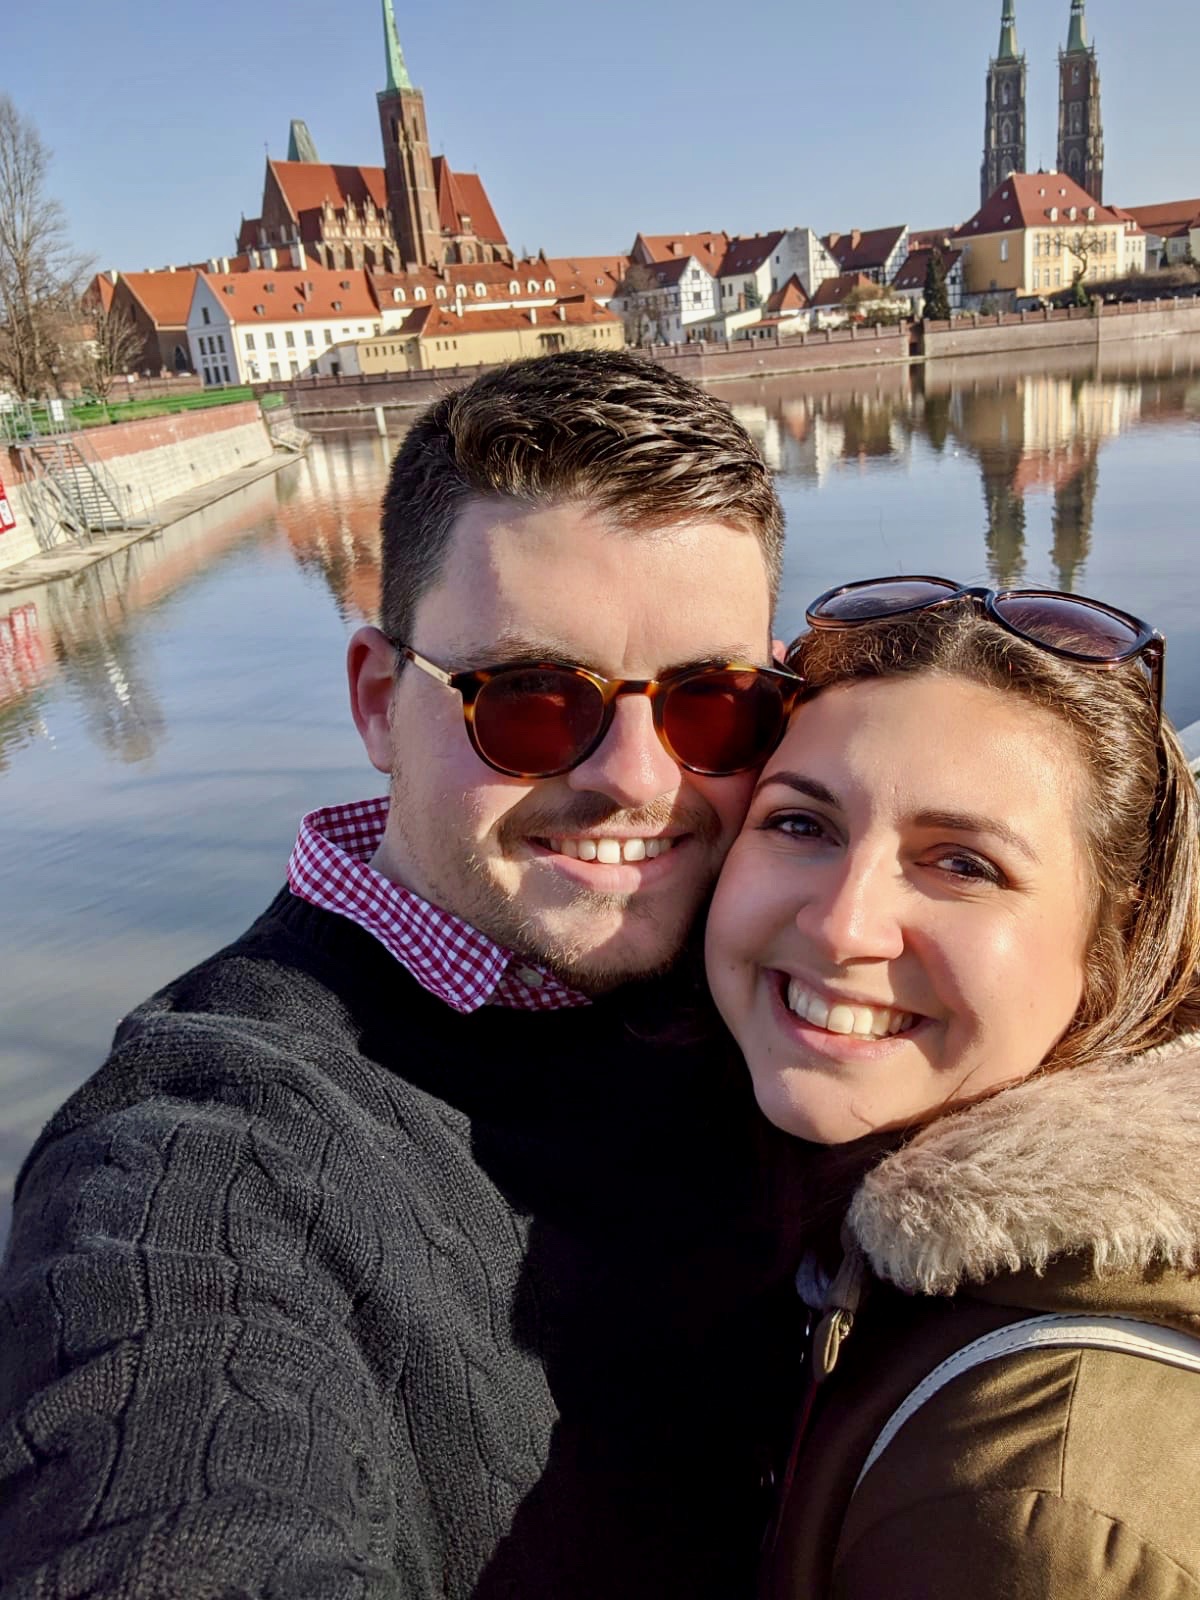 Practising gratitude during coronavirus: Nell and her boyfriend smiling at the camera, taken in Wroclaw in Poland